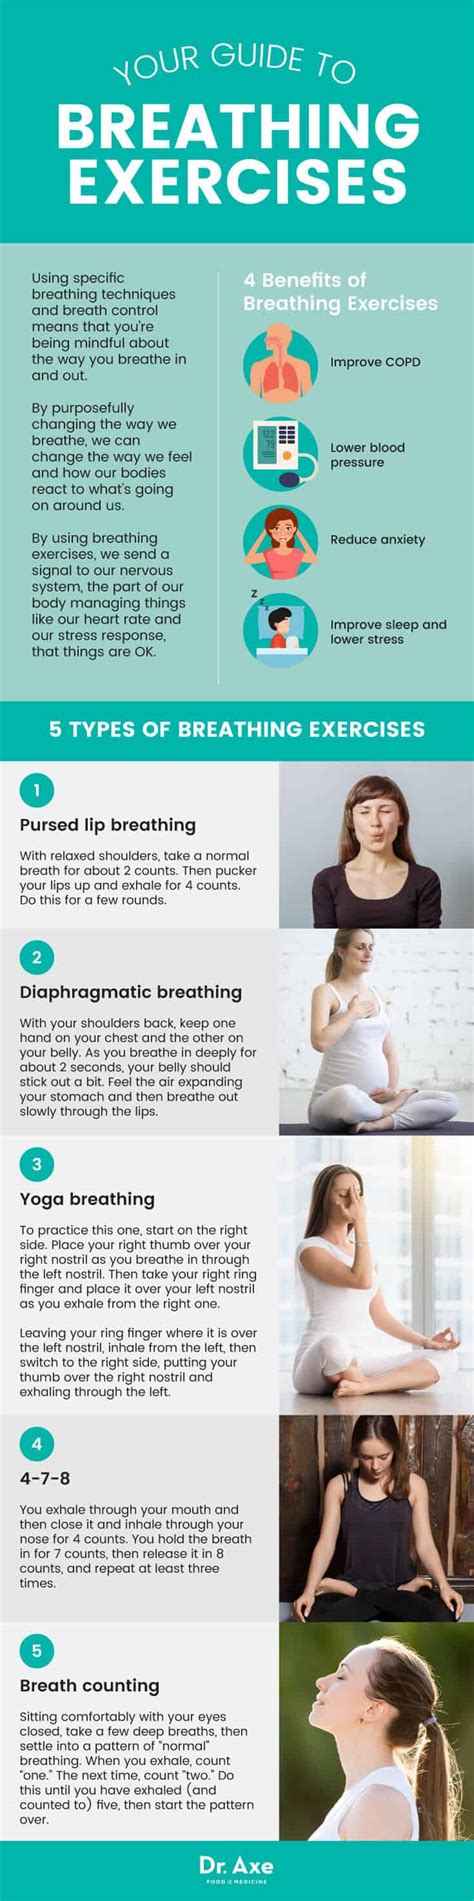 5 Breathing Exercises To Reduce Stress And Improve Sleep Dr Axe